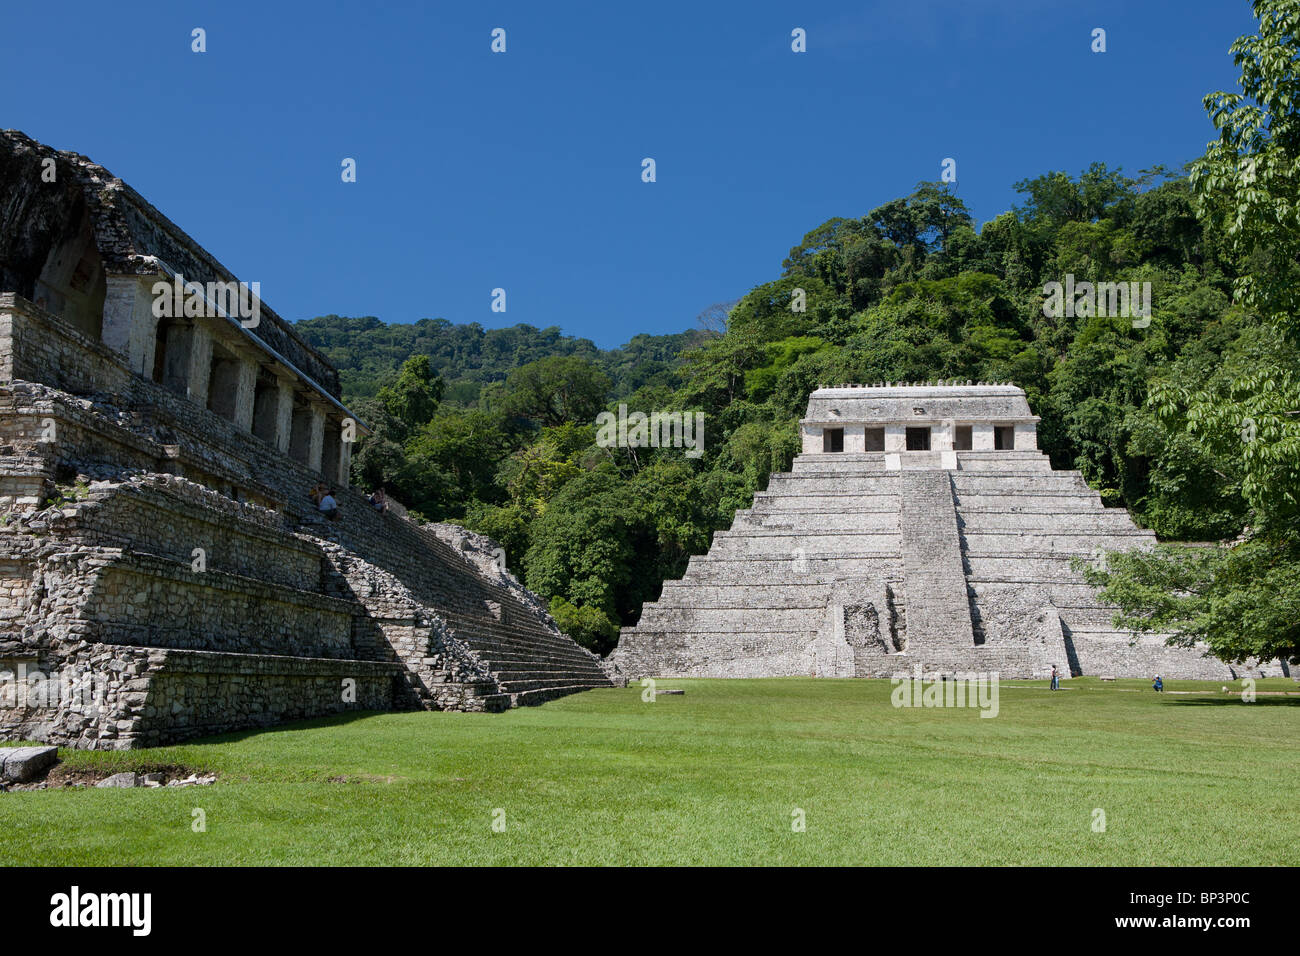 Front view of the Temple of the Inscriptions (tomb of king Pakal) in Palenque Archeological Site, Chiapas, Mexico Stock Photo